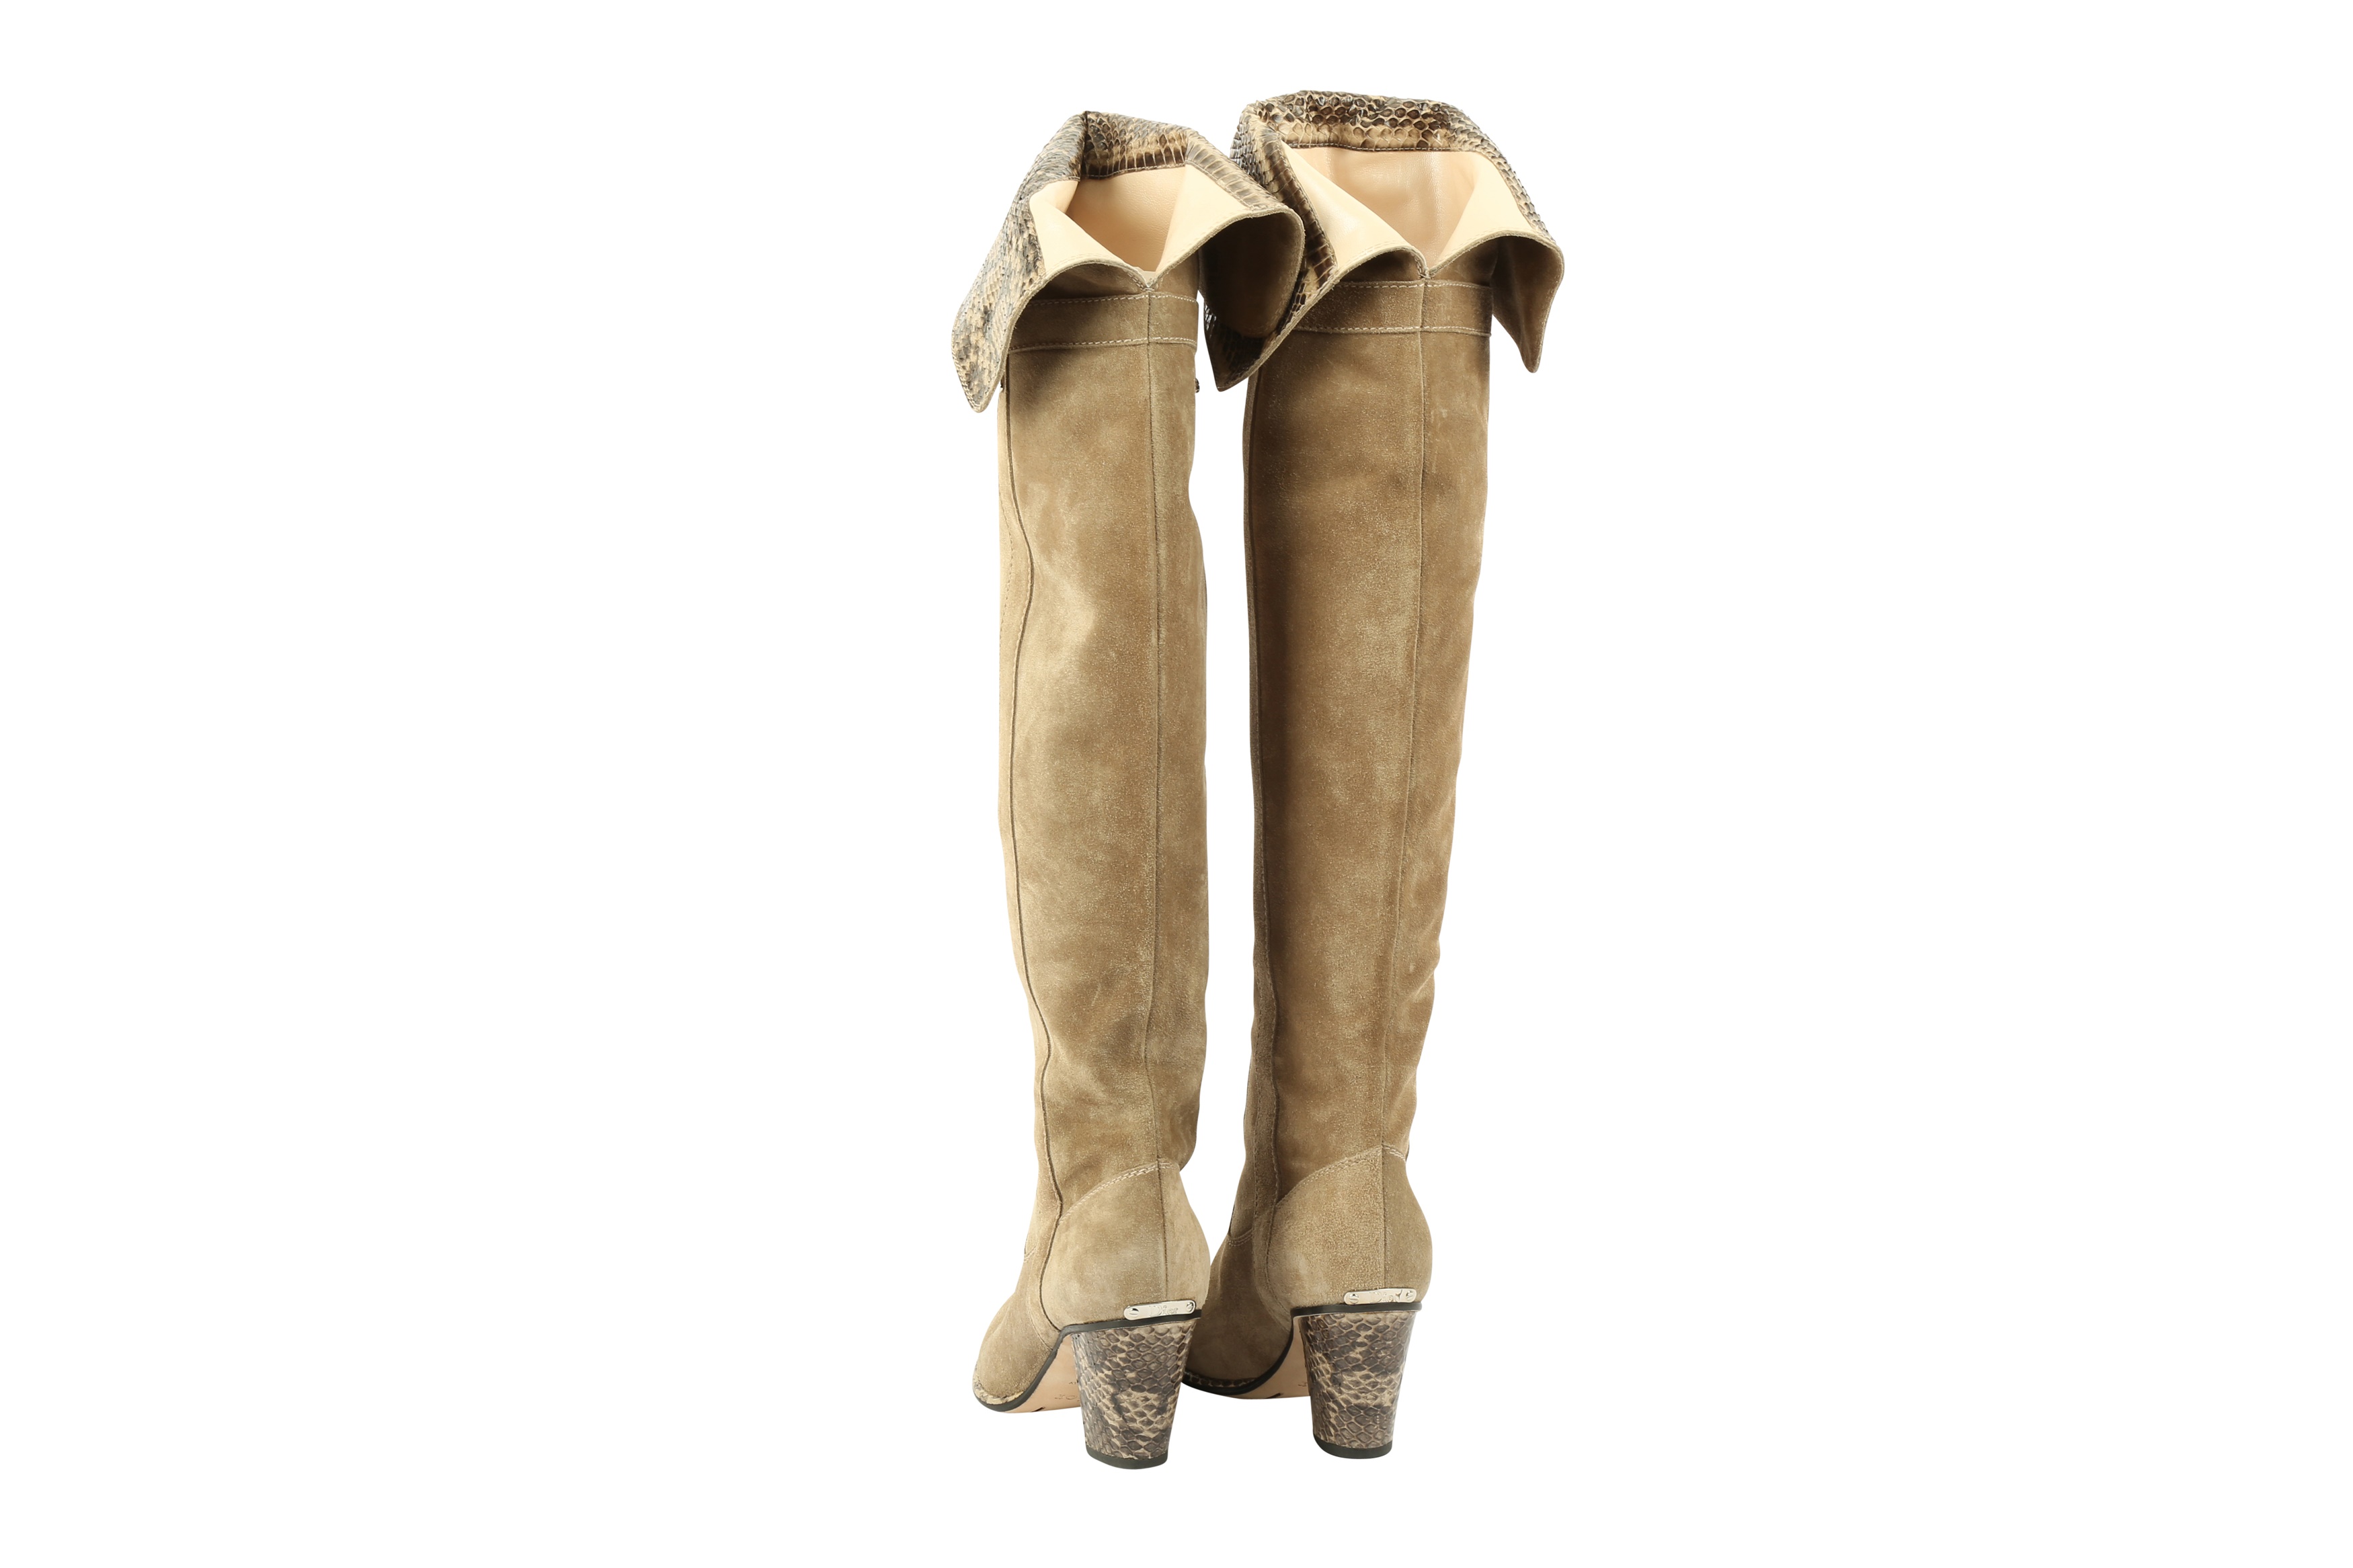 Dior Beige Cowboy Boots - Size 36.5 - Image 3 of 6